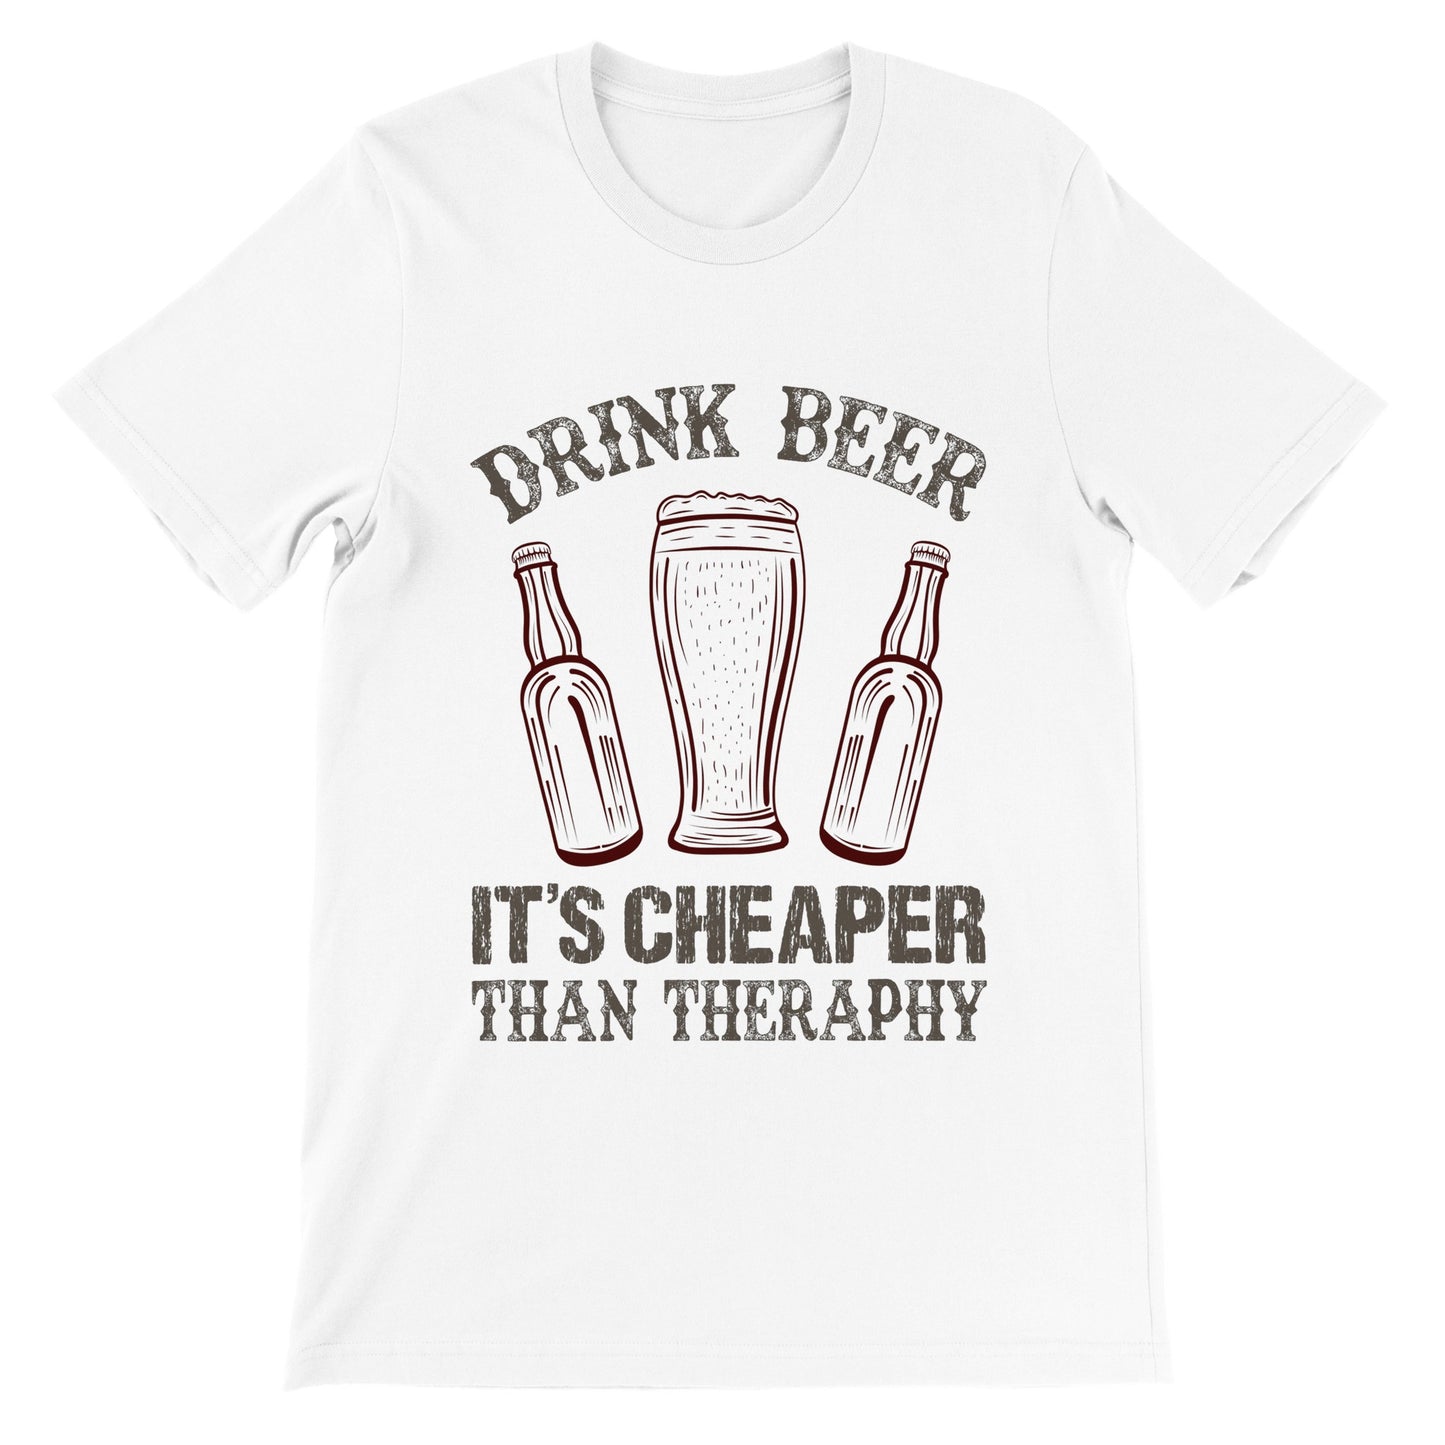 Sjove T-shirts - Drink Beer, It's Cheaper Than Theraphy - Premium Unisex T-shirt